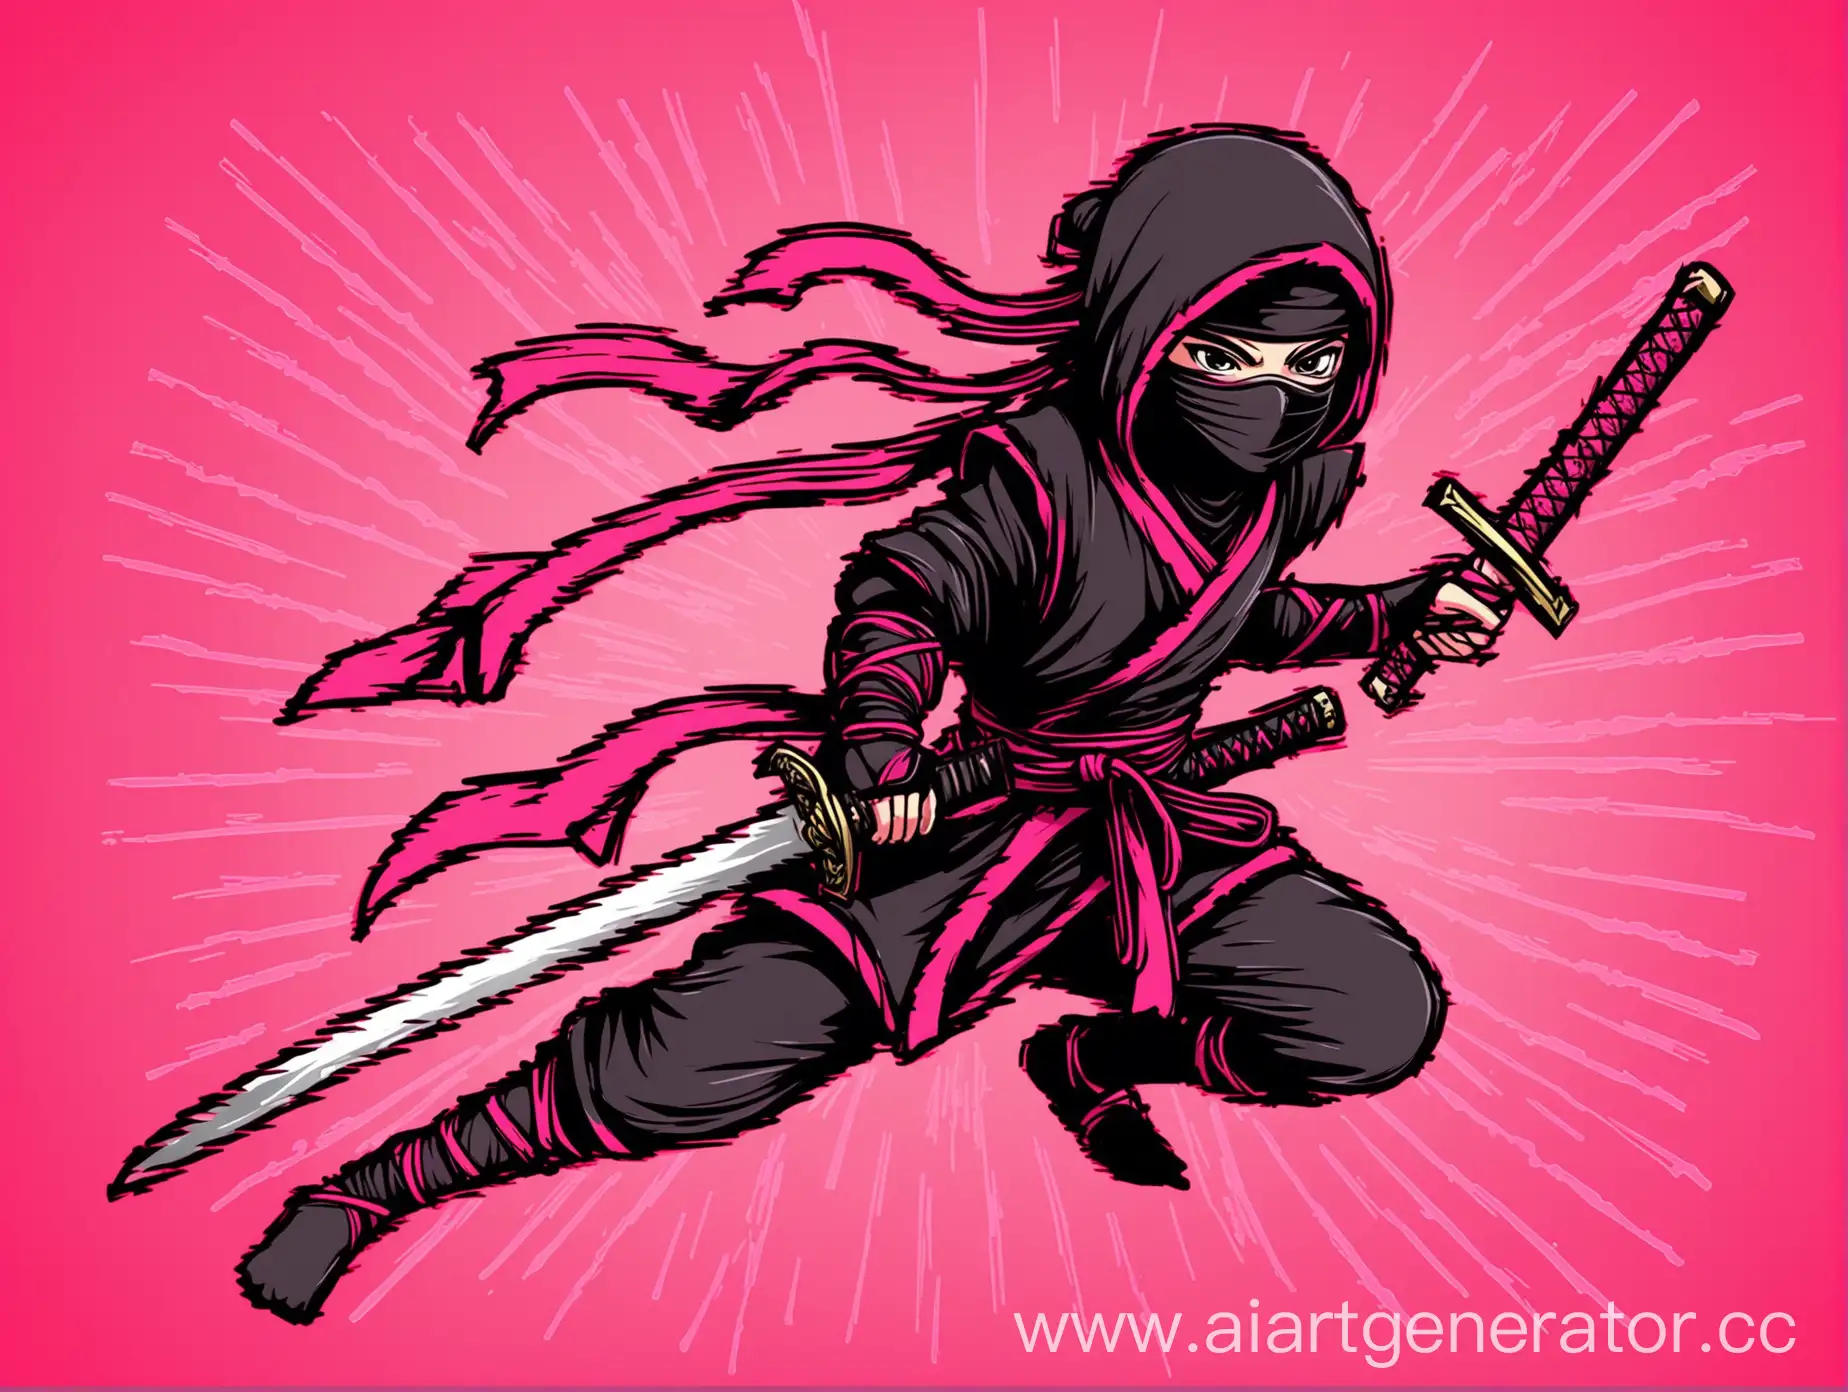 Pink-Ninja-with-Sword-on-Red-Outlines-Against-Pink-Background